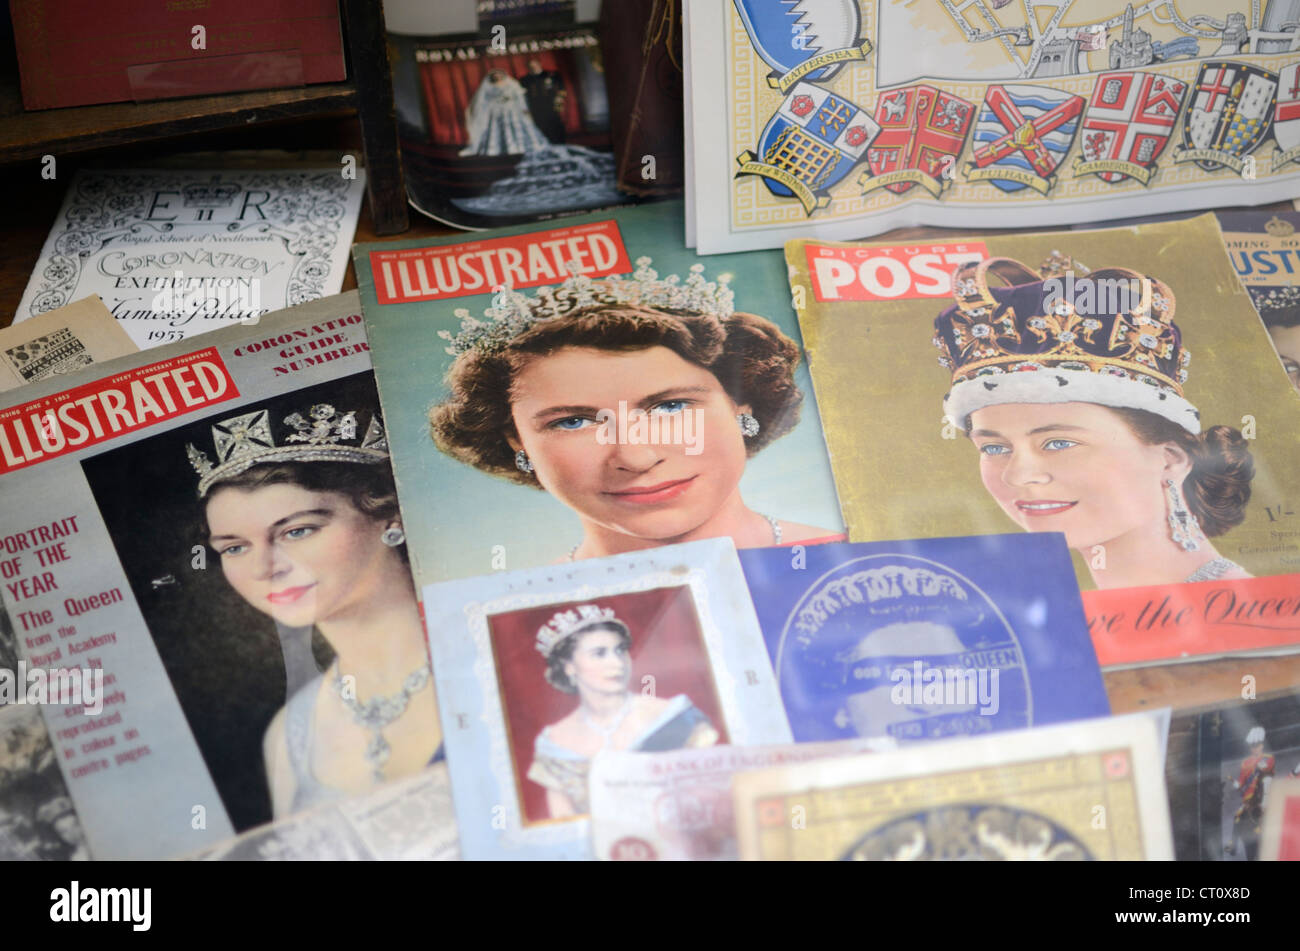 Images of Queen Elizabeth II on the covers of old magazines in a shop window display Stock Photo